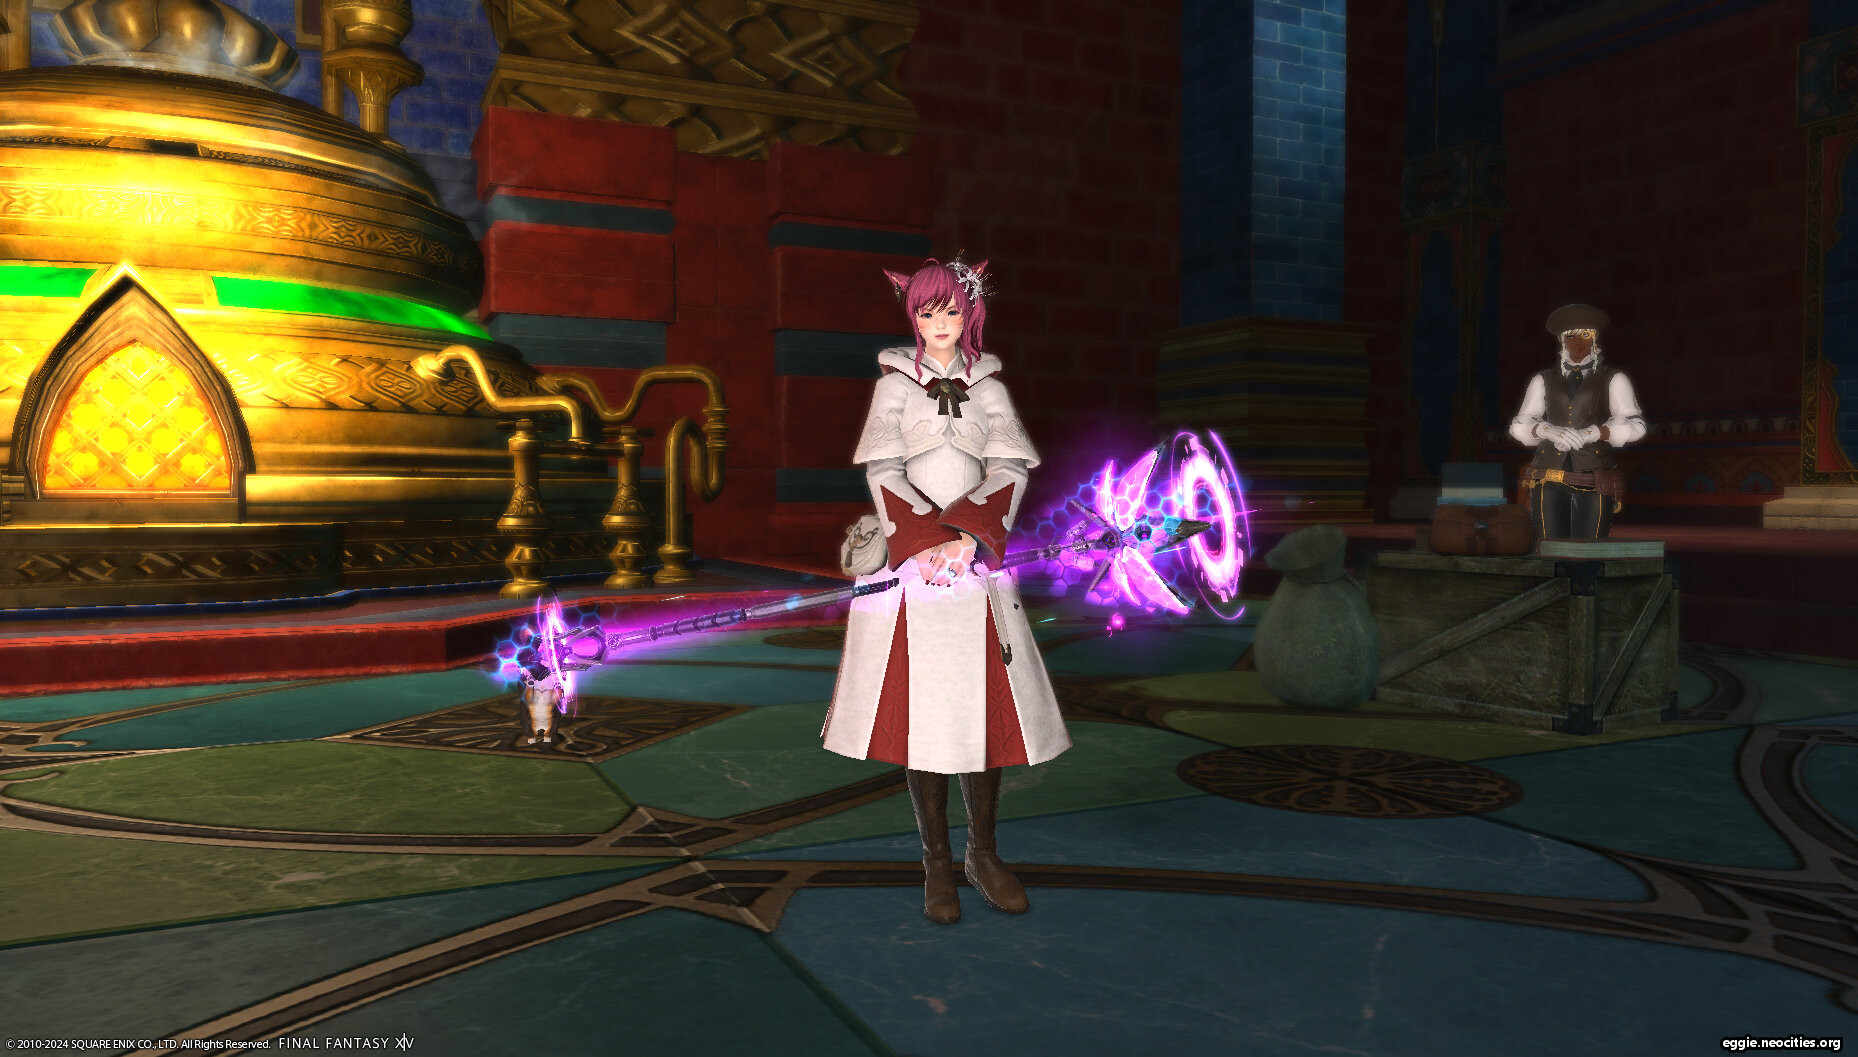 Zel posing with the Mandervillous Cane. It is glowing pink.